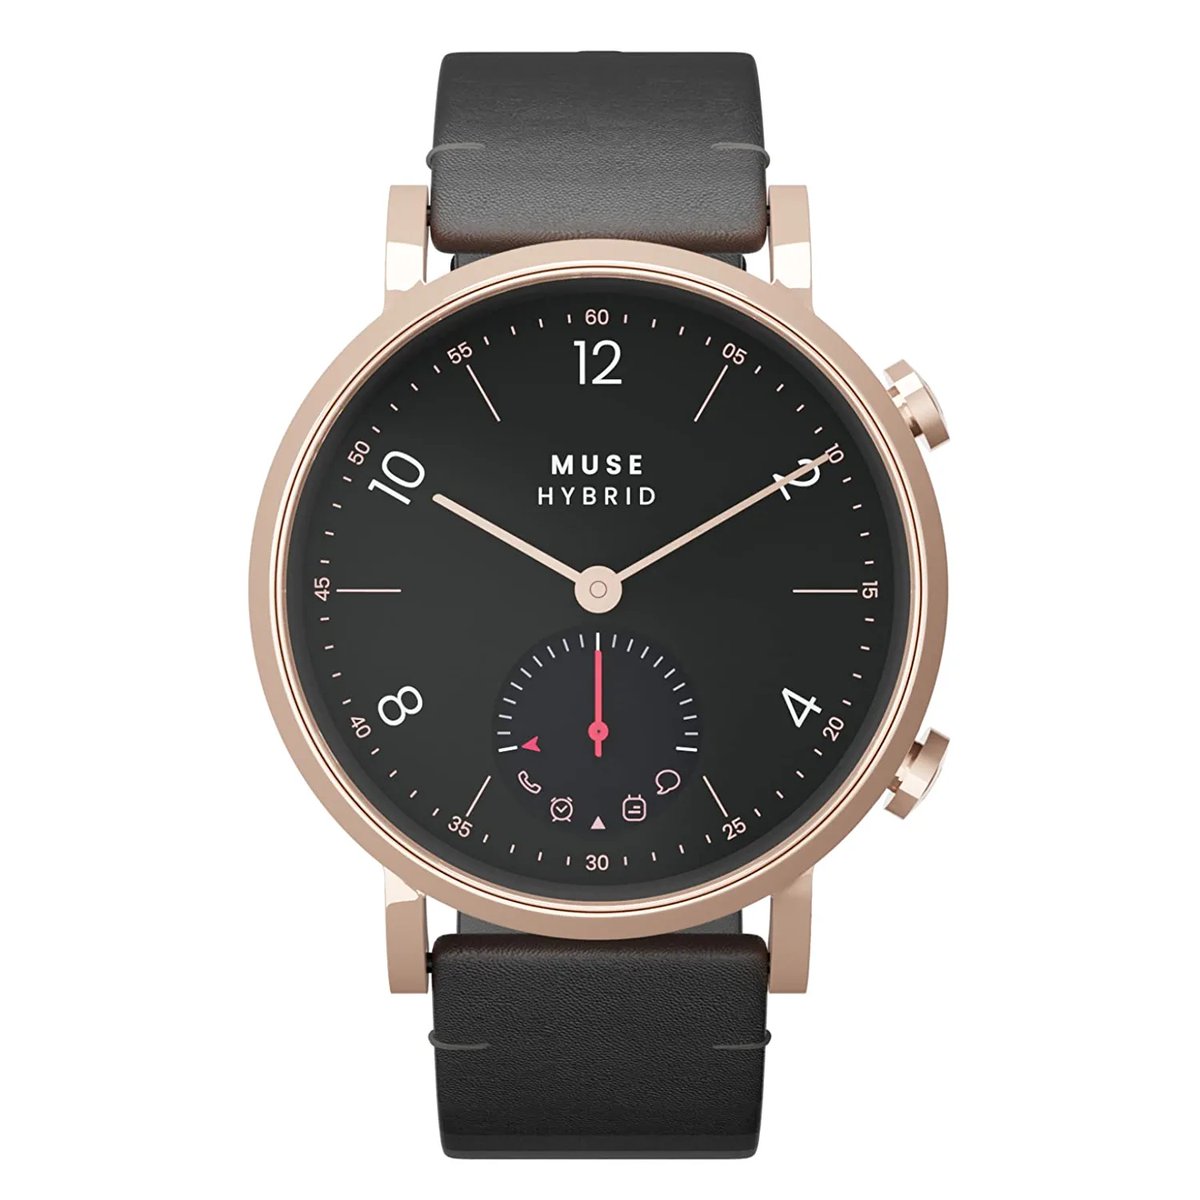 The Muse hybrid smartwatch is a stylish smartwatch with a variety of features for tracking daily activity and improving overall health and wellness.

Click for more bsapp.ai/J3oPjwAJR

#36mmwatch #bluetoothconnectivity #personalizednotifications #hybridwatch